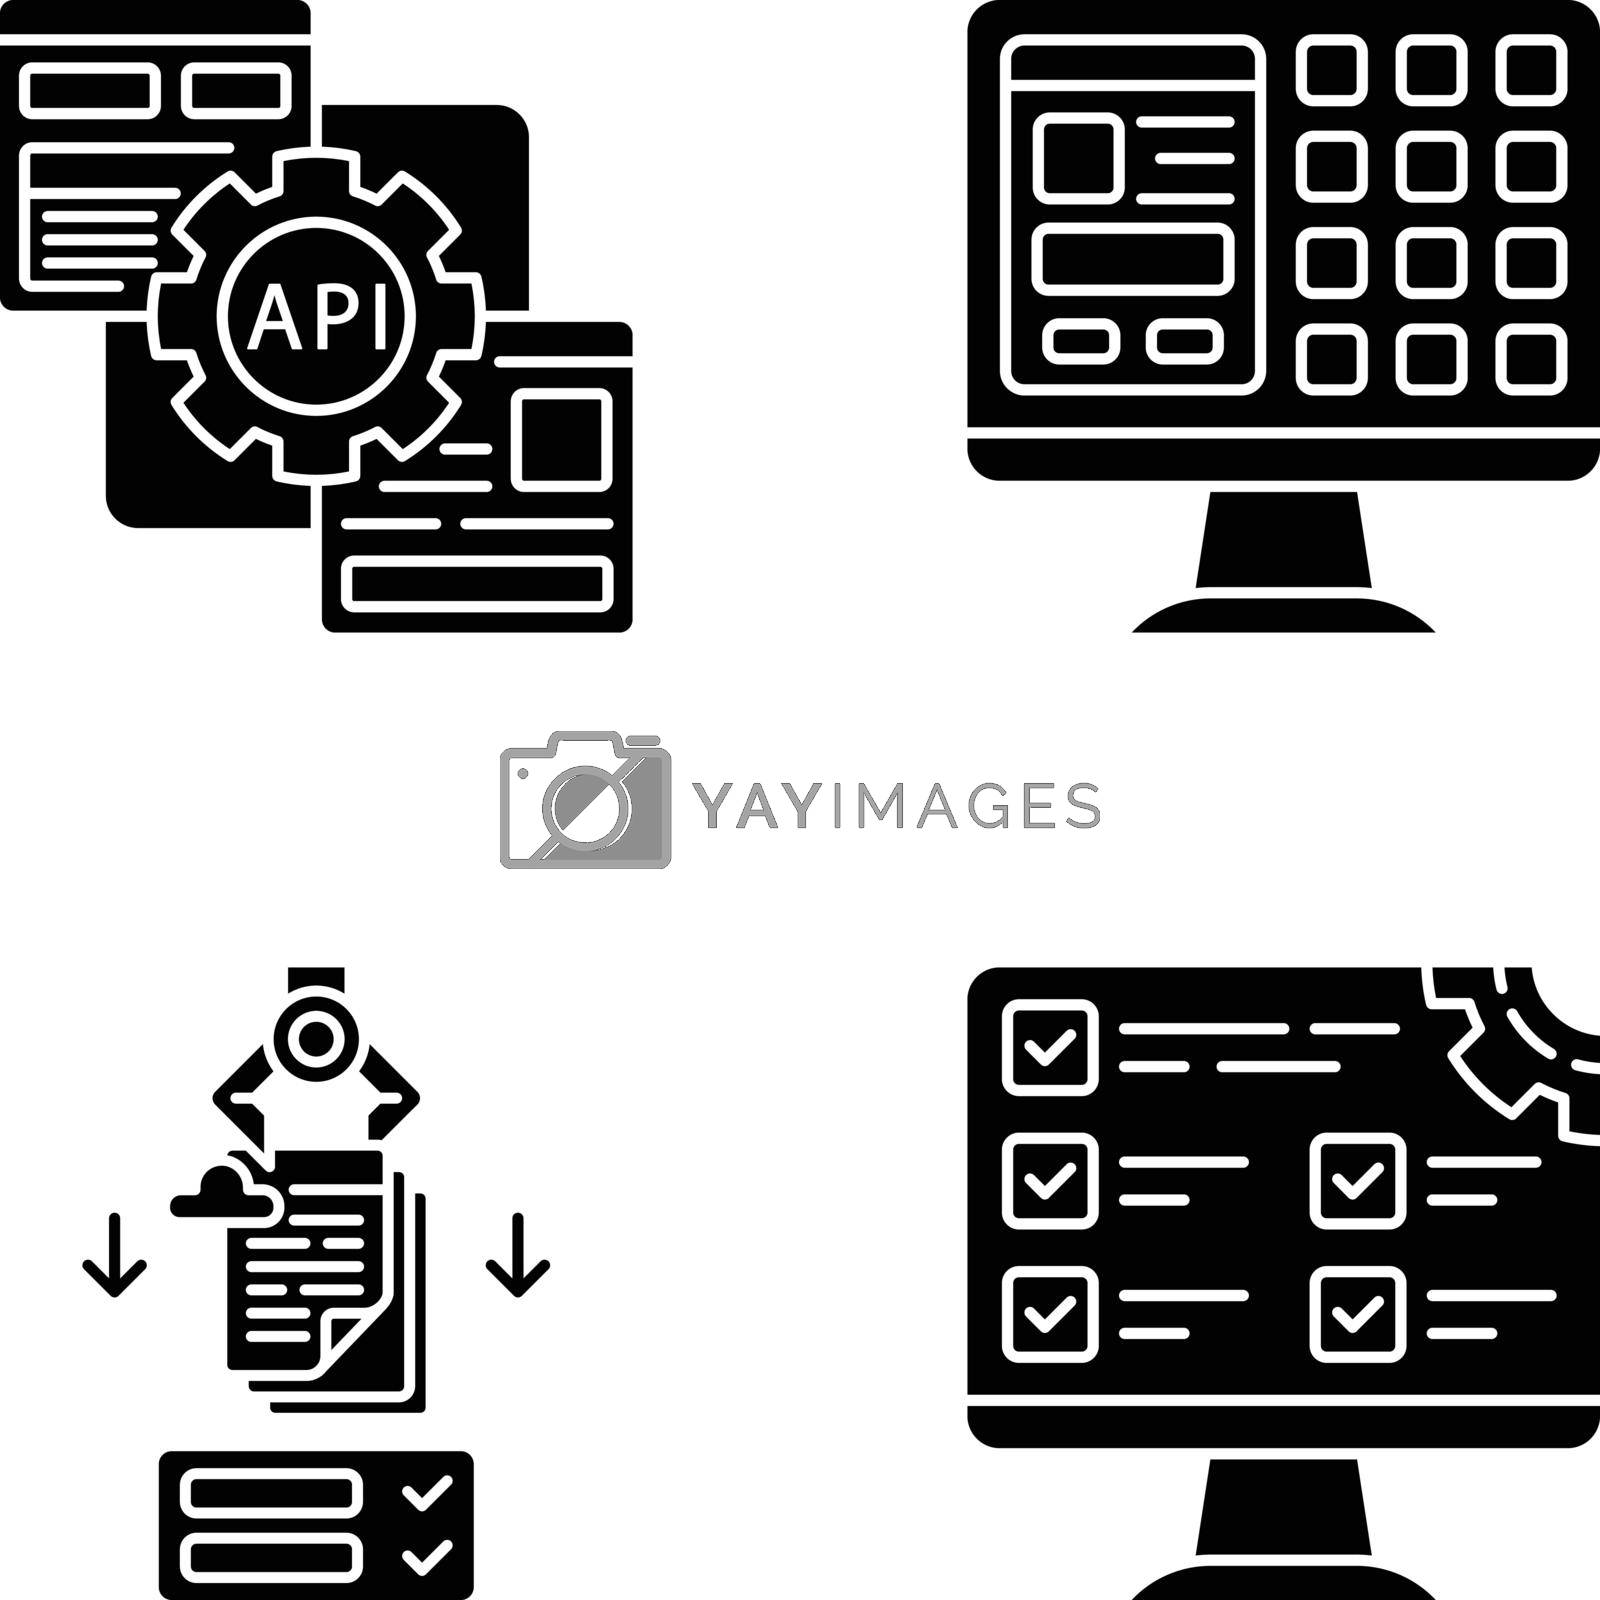 Royalty free image of RPA glyph icons set by bsd